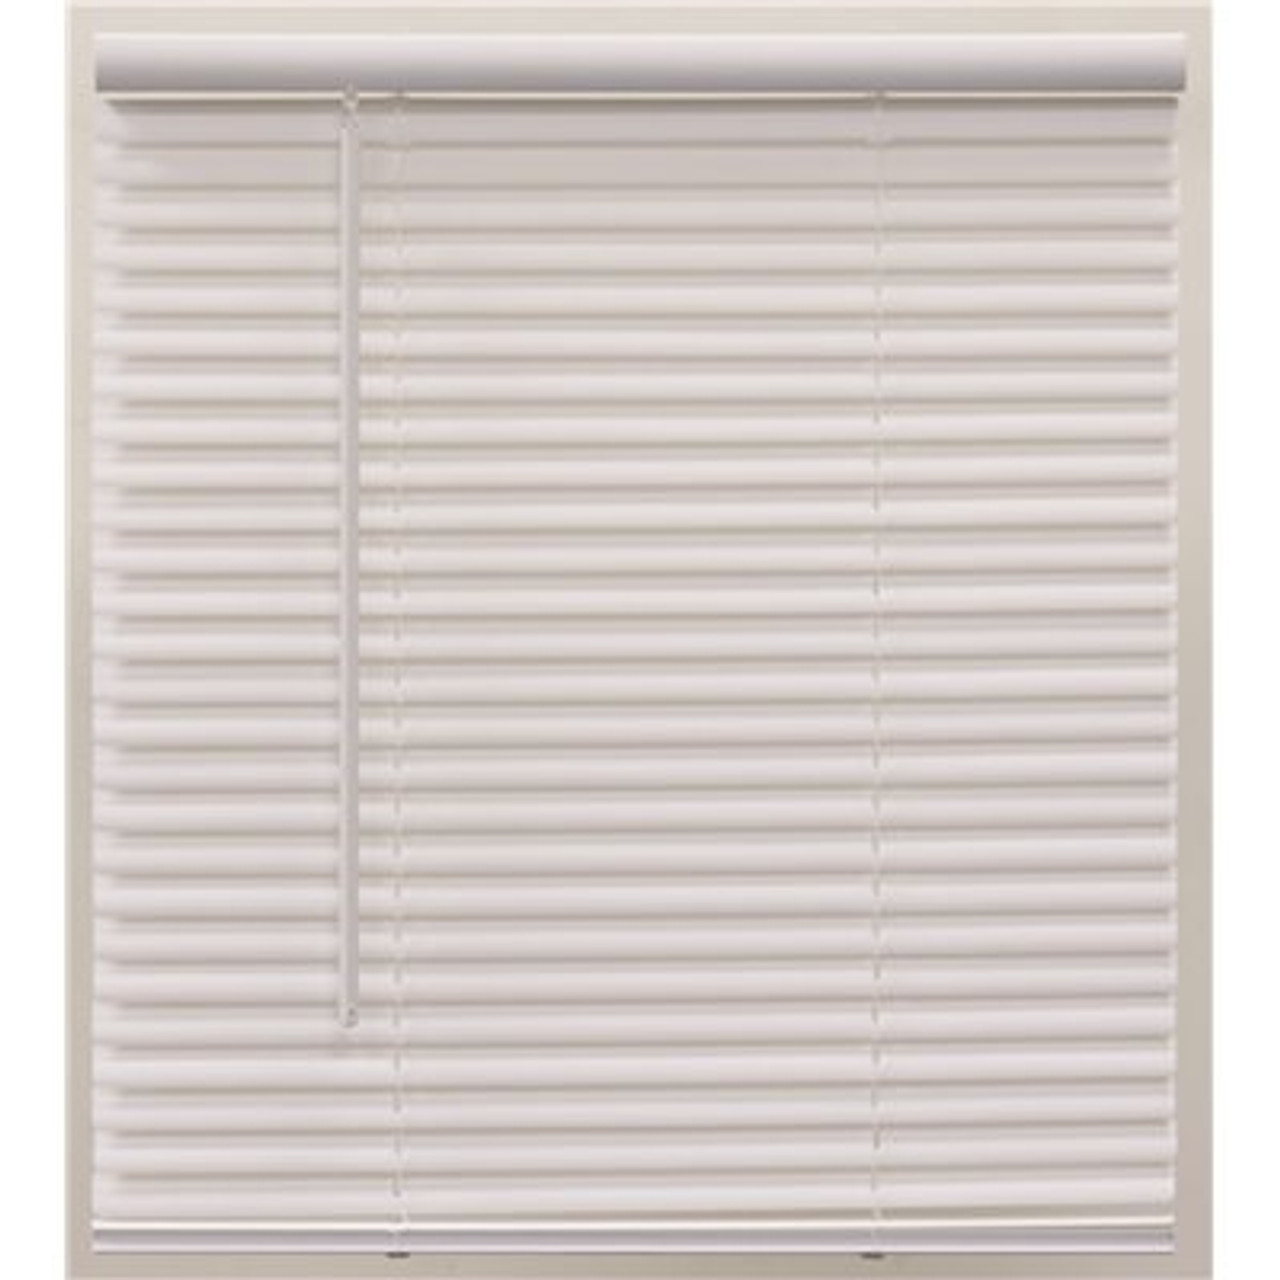 Champion Pre-Cut 18 in. W x 72 in. L White Cordless Light Filtering Vinyl Mini Blind with 1 in. Slats